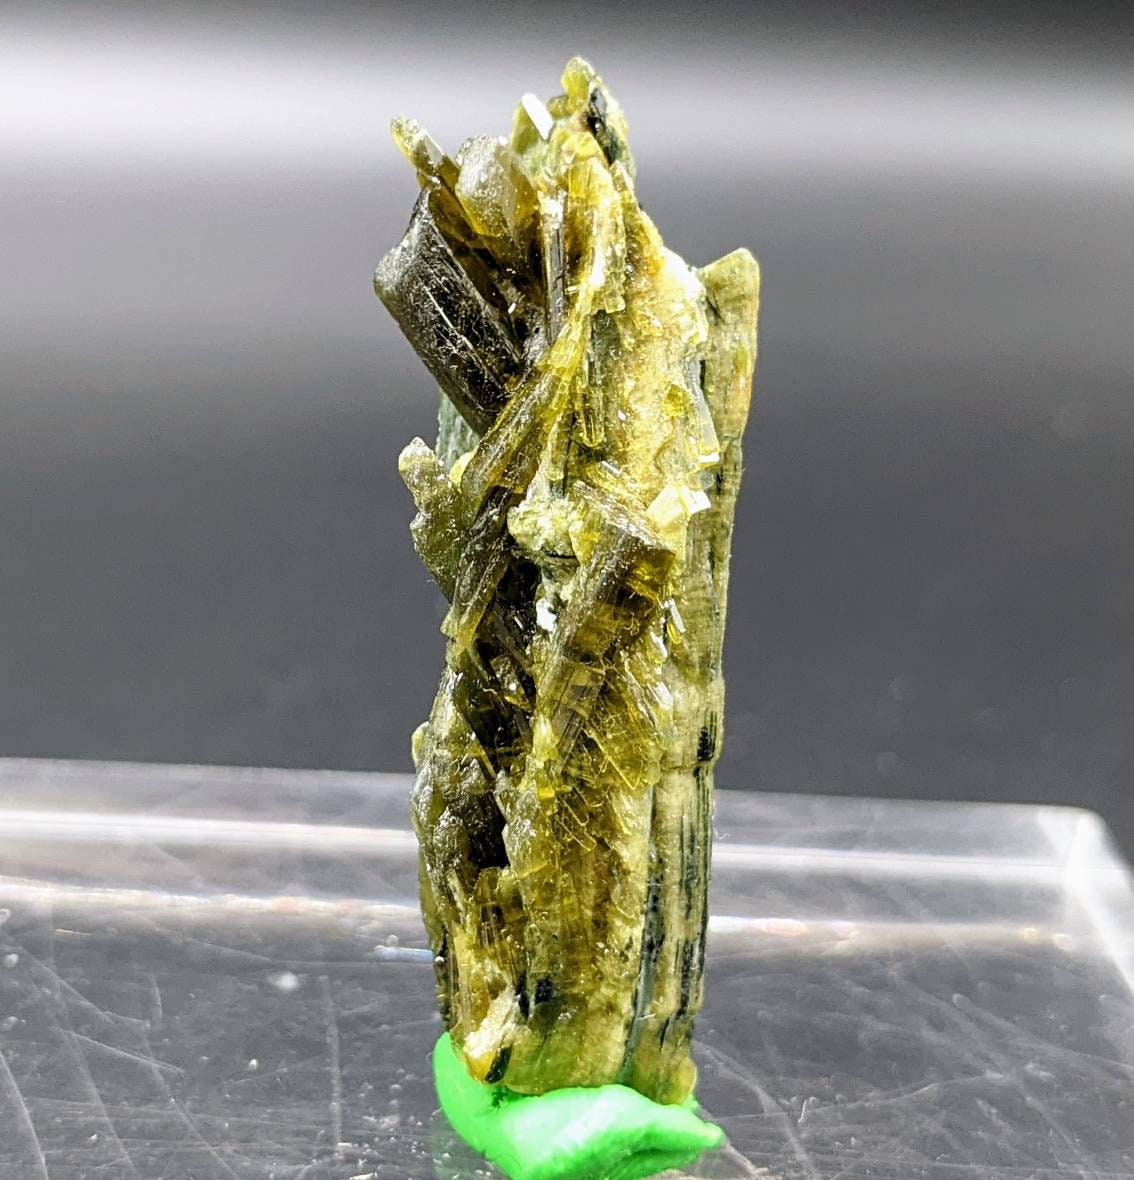 ARSAA GEMS AND MINERALSNatural aesthetic 6.8 grams Beautiful vertical green epidote crystal from KP Pakistan - Premium  from ARSAA GEMS AND MINERALS - Just $25.00! Shop now at ARSAA GEMS AND MINERALS